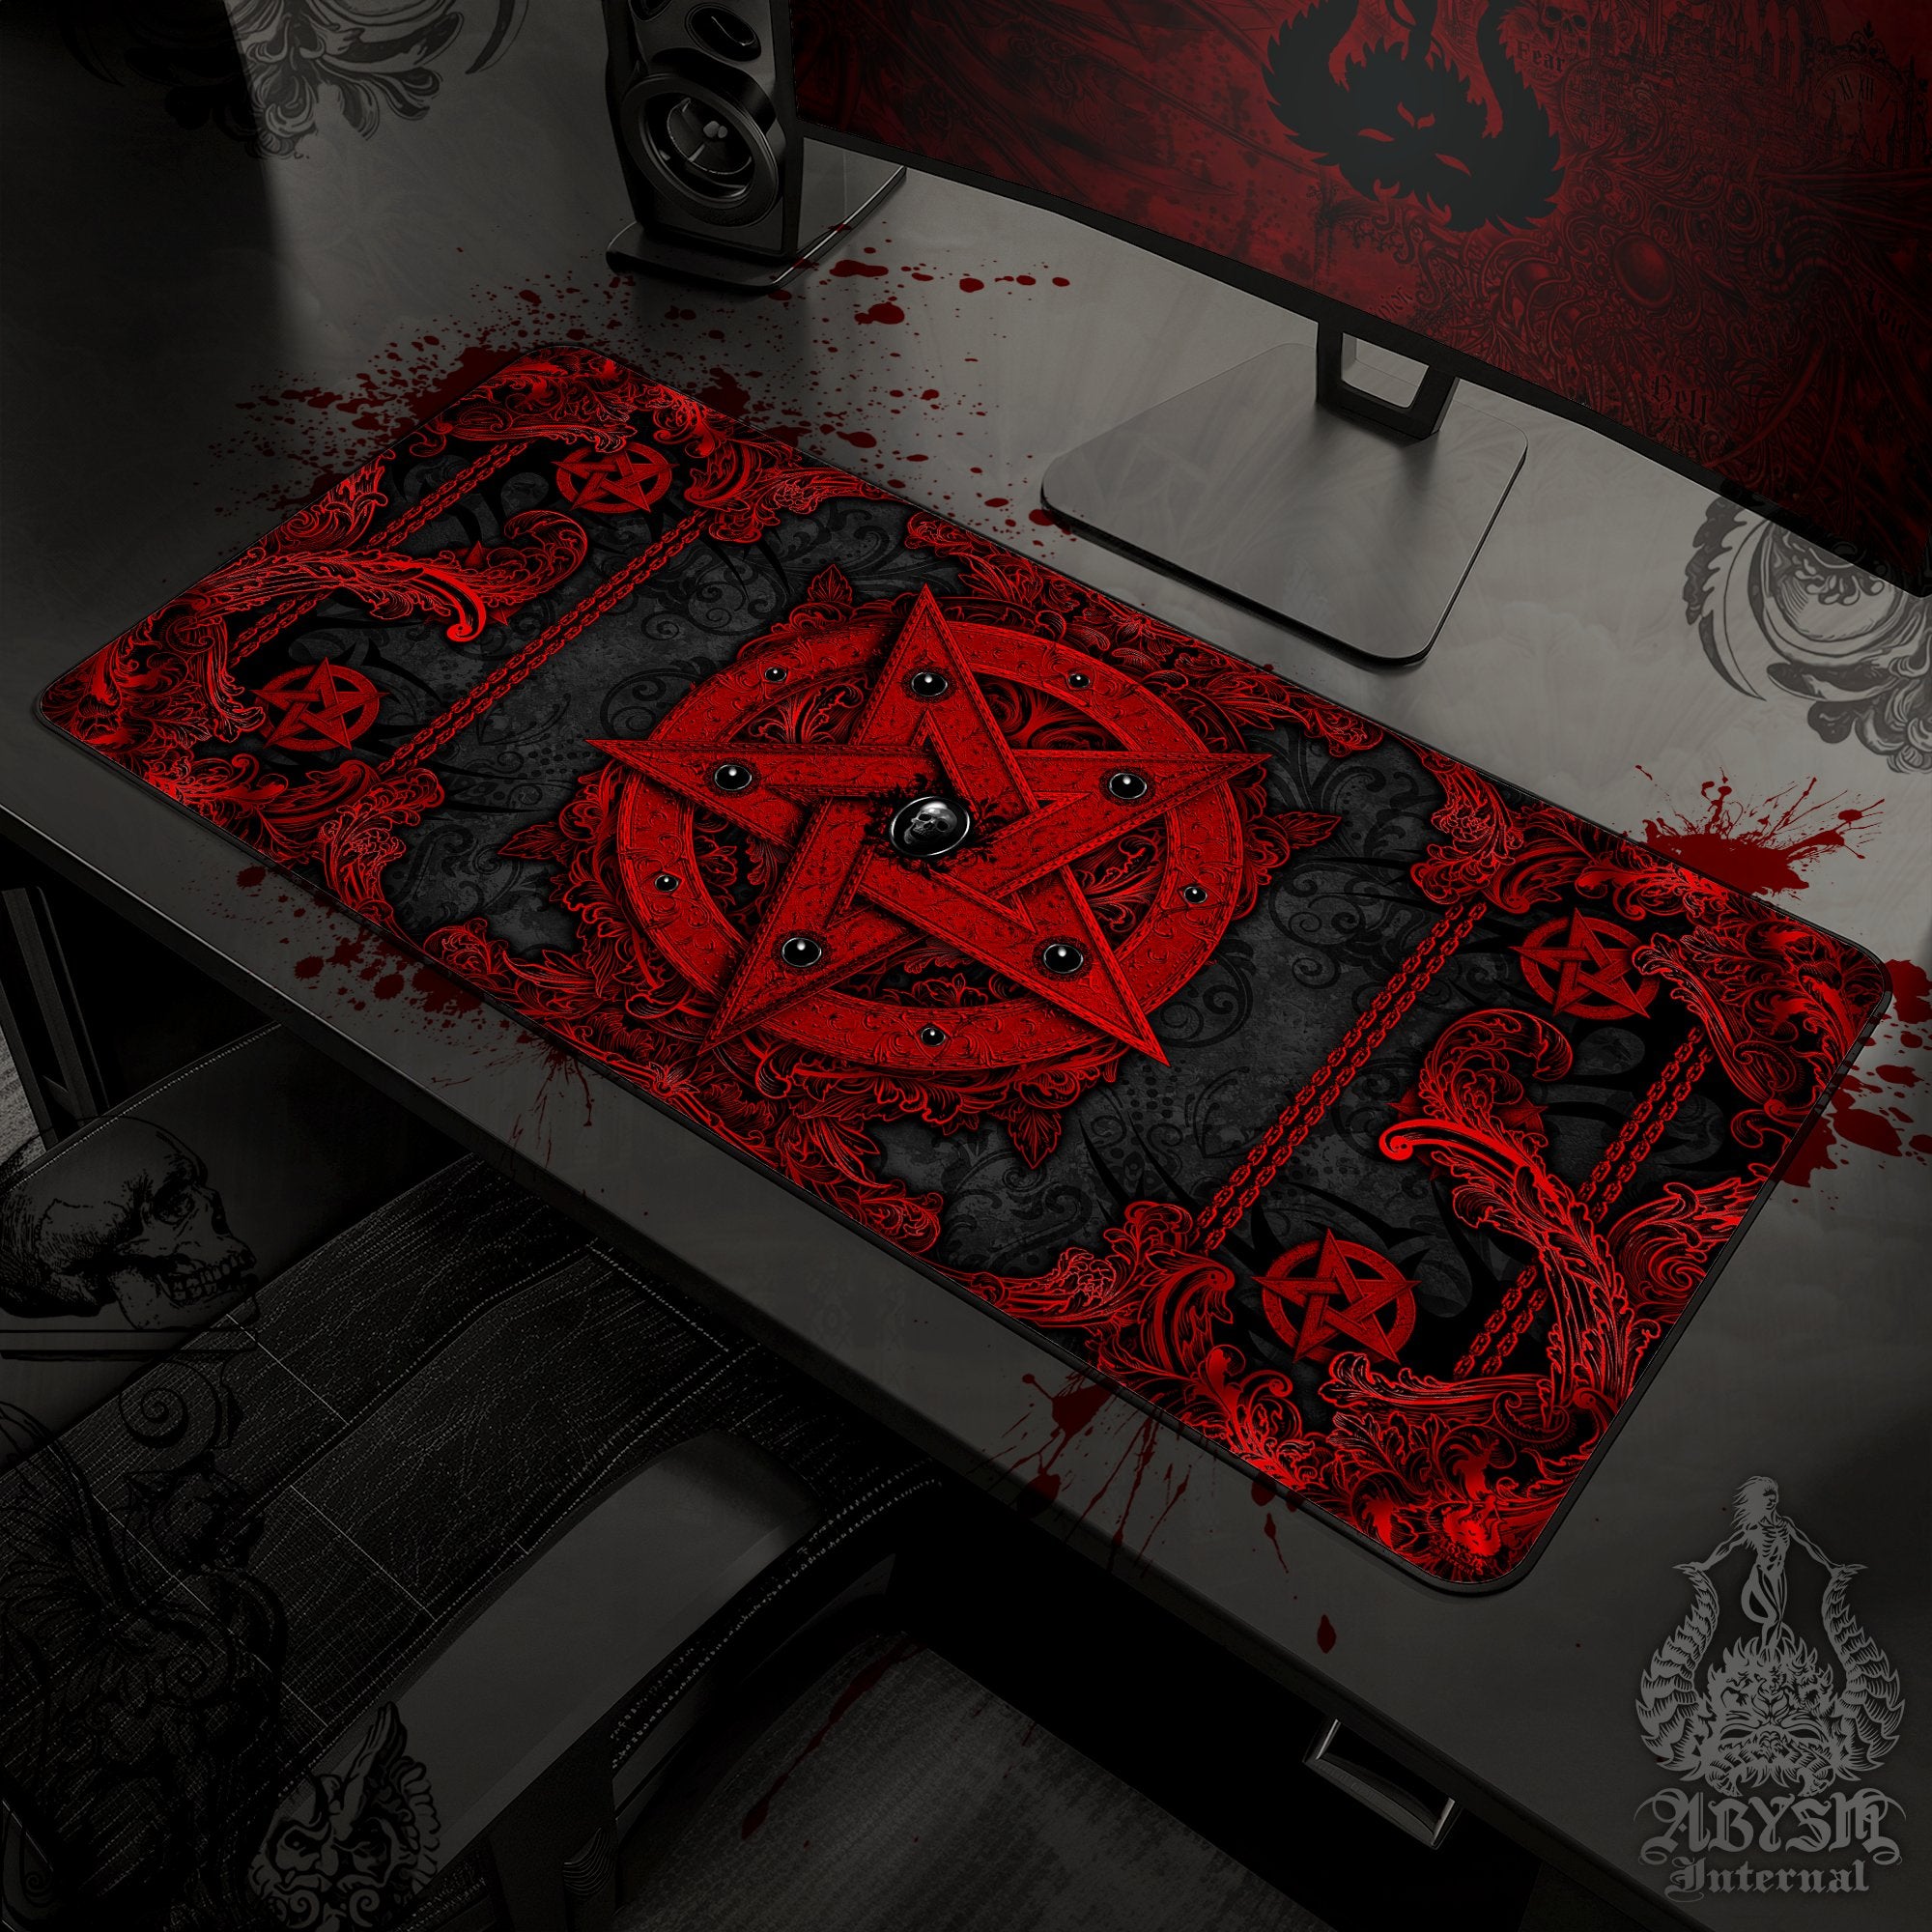 Red Pentagram Gaming Mouse Pad, Satanic Desk Mat, Bloody Gothic Table Protector Cover, Heavy Metal Workpad, Art Print - 4 Options - Abysm Internal